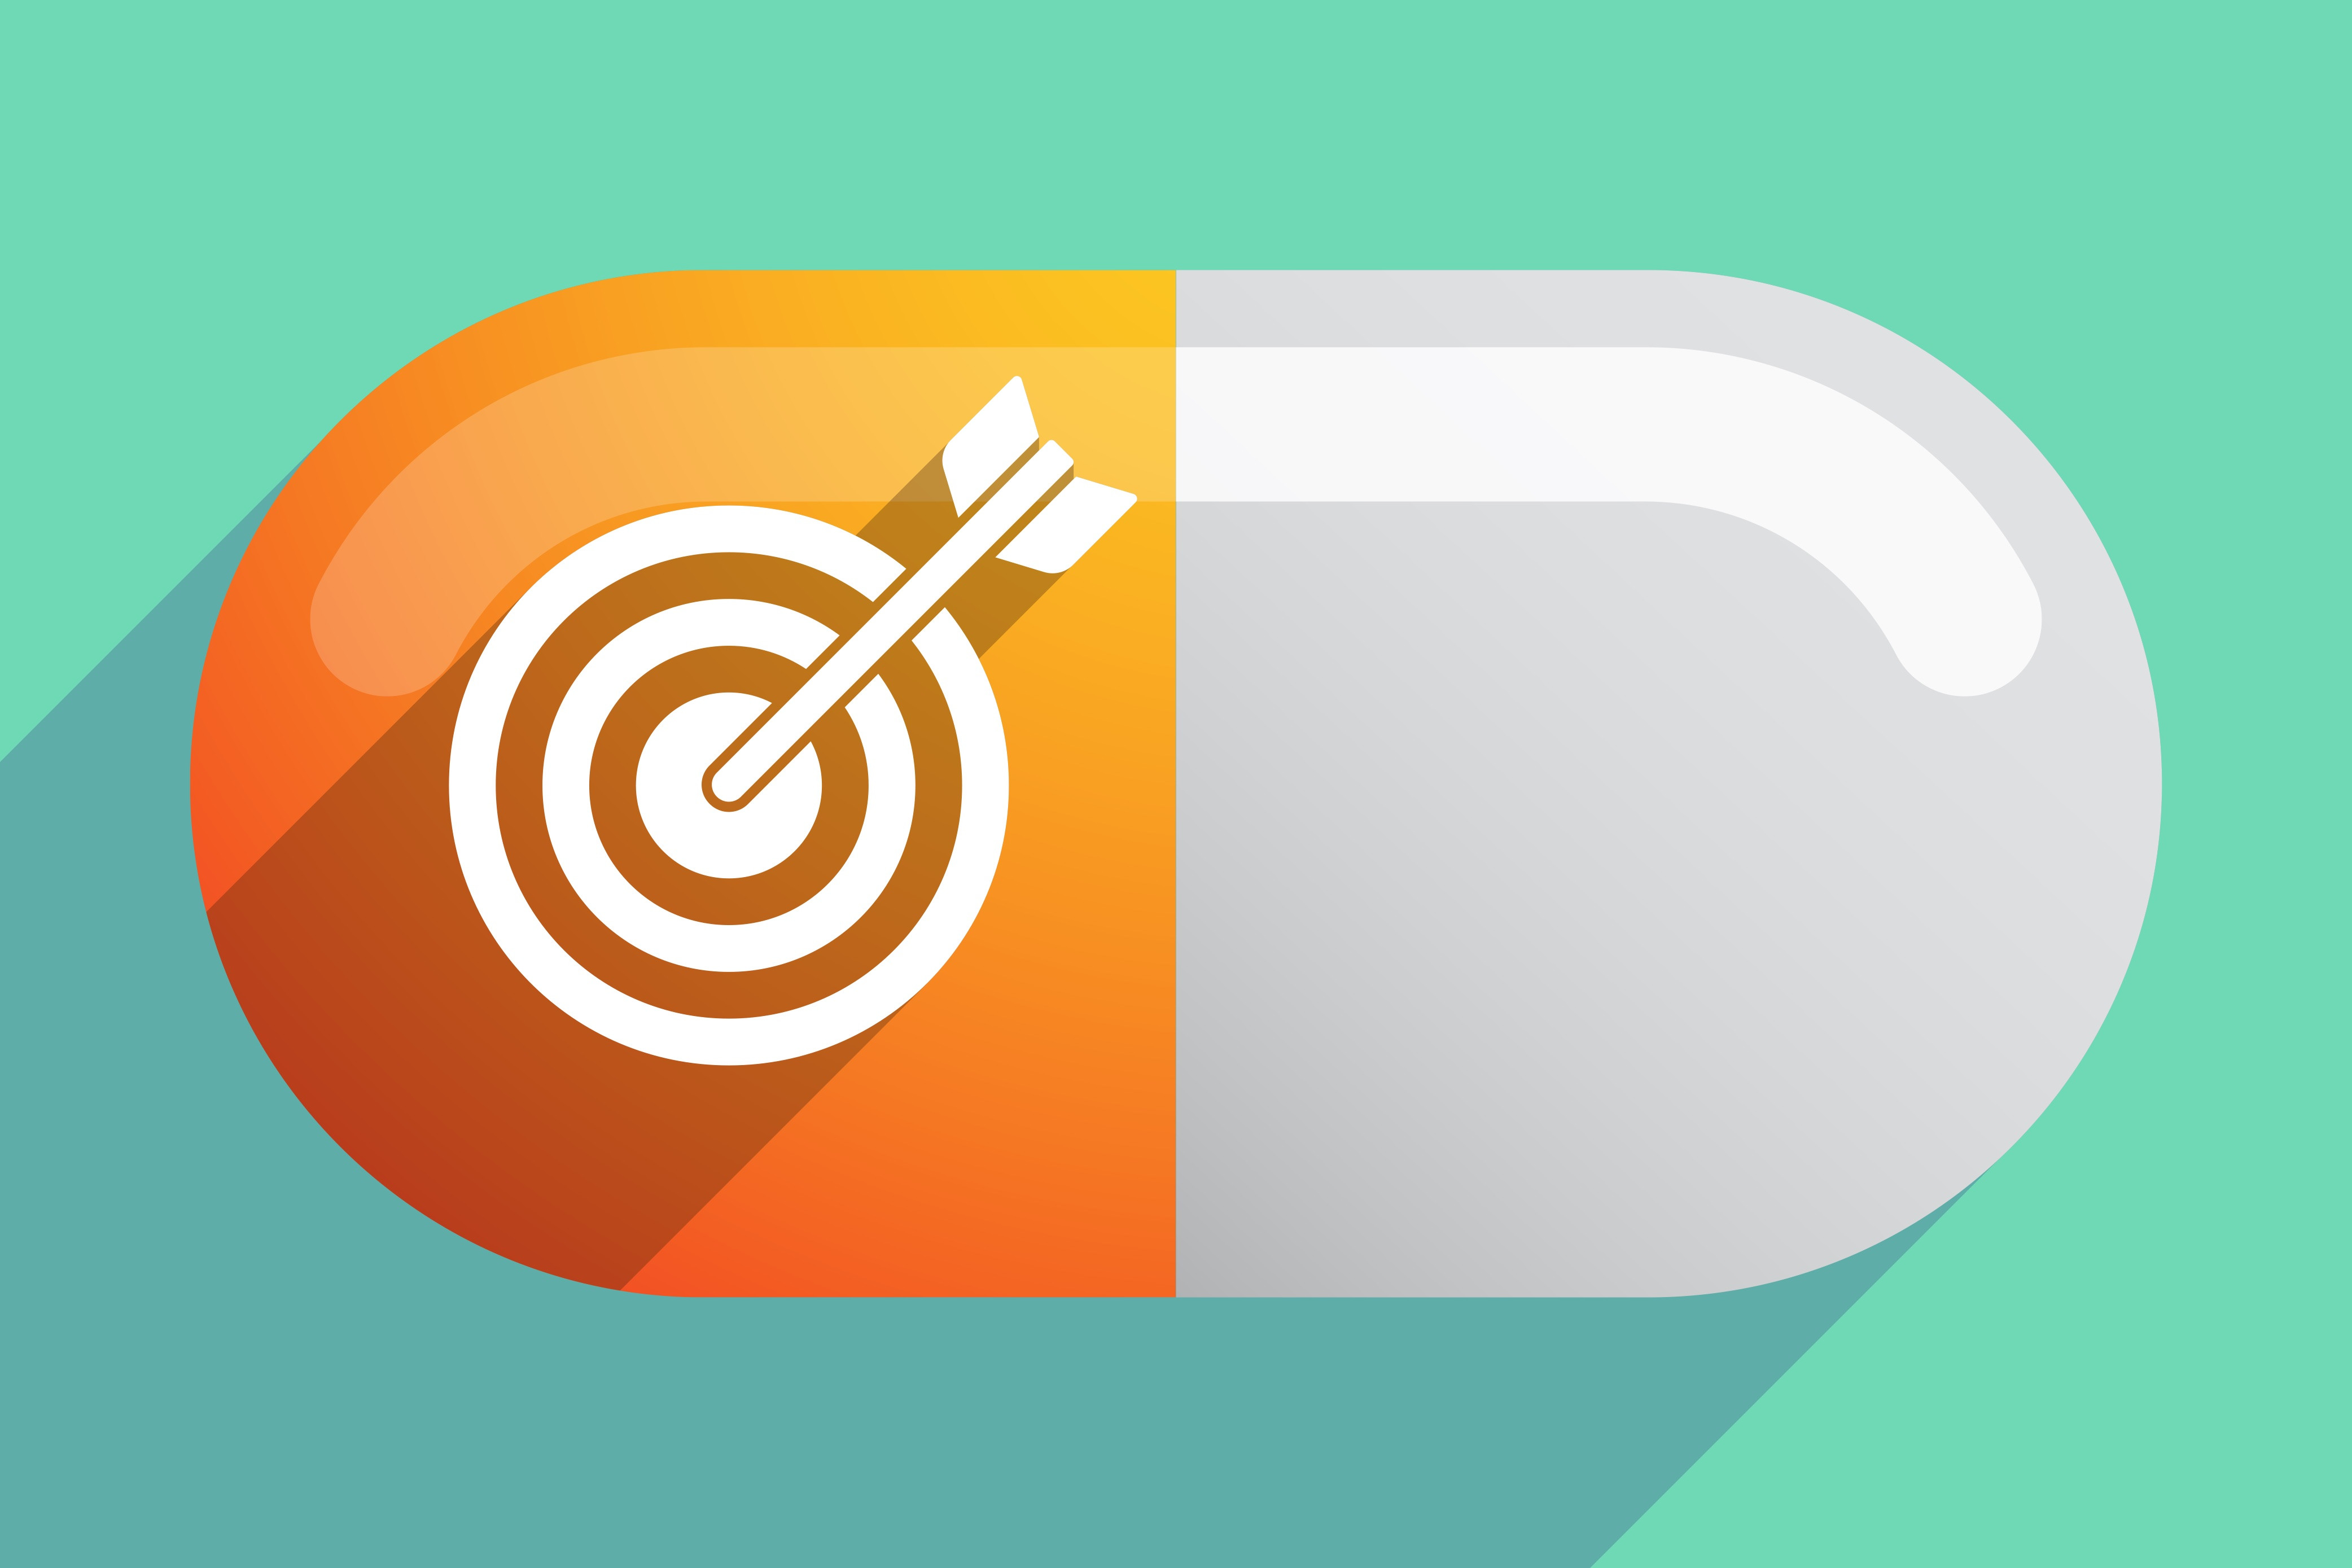 illustration of a medication capsule on a green background right half is white left half is orange with a white bullseye on it showing an arrow striking the center